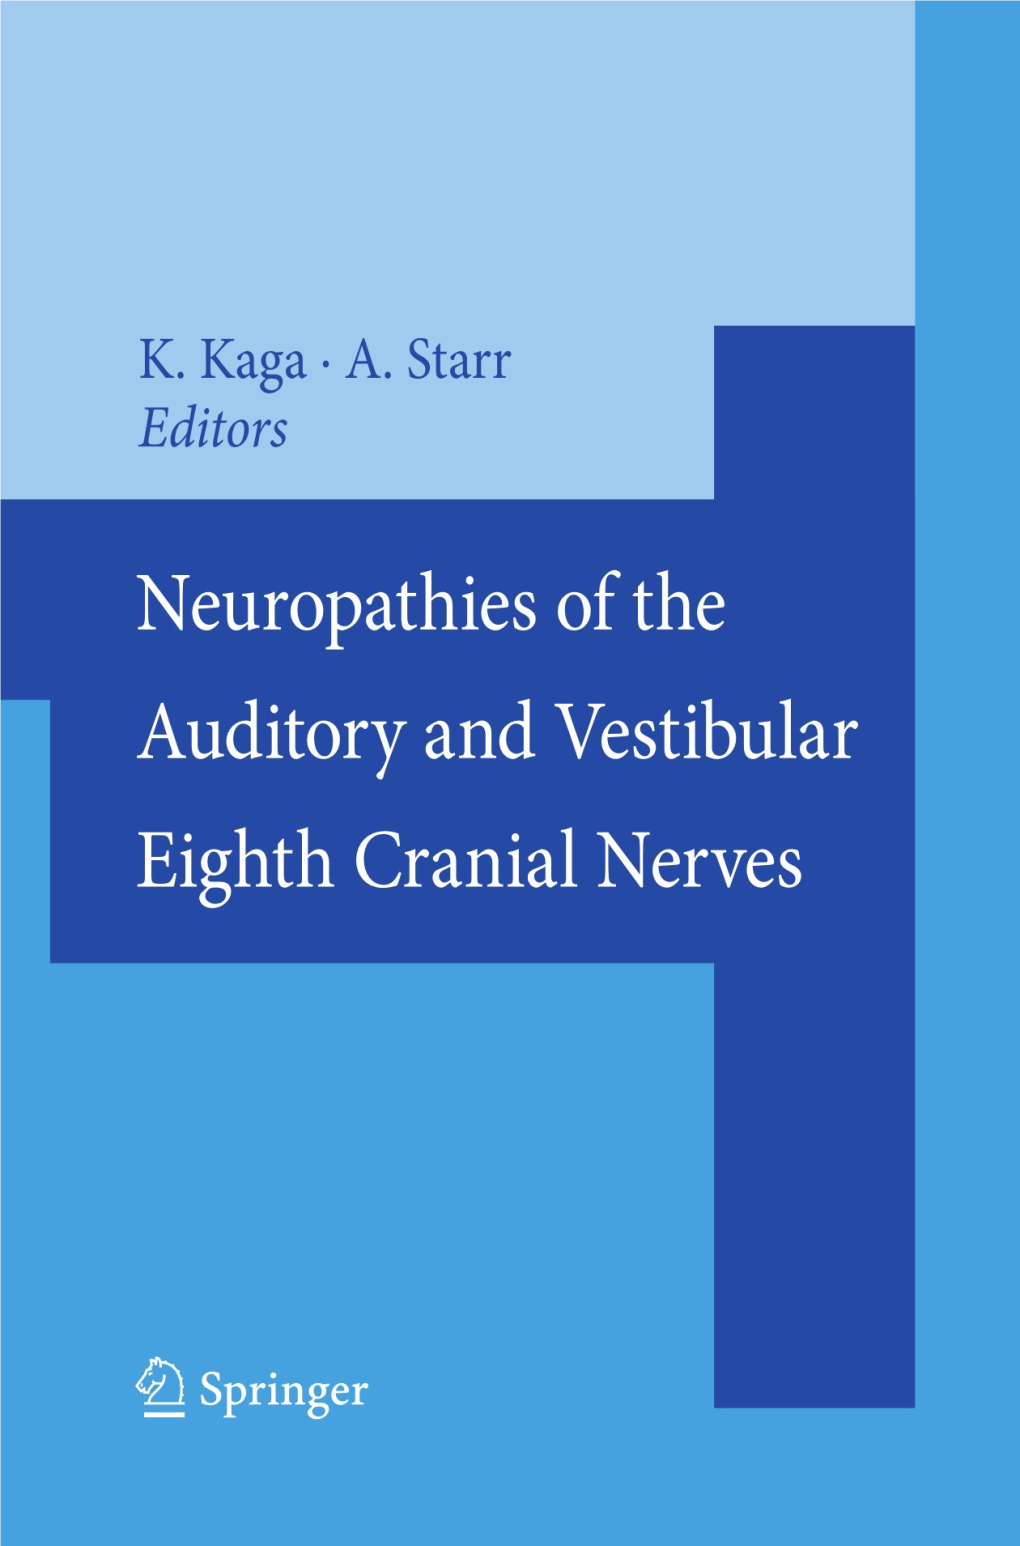 Auditory Neuropathy Is Paid Much More Attention Because of the Increase in New ﬁ Ndings